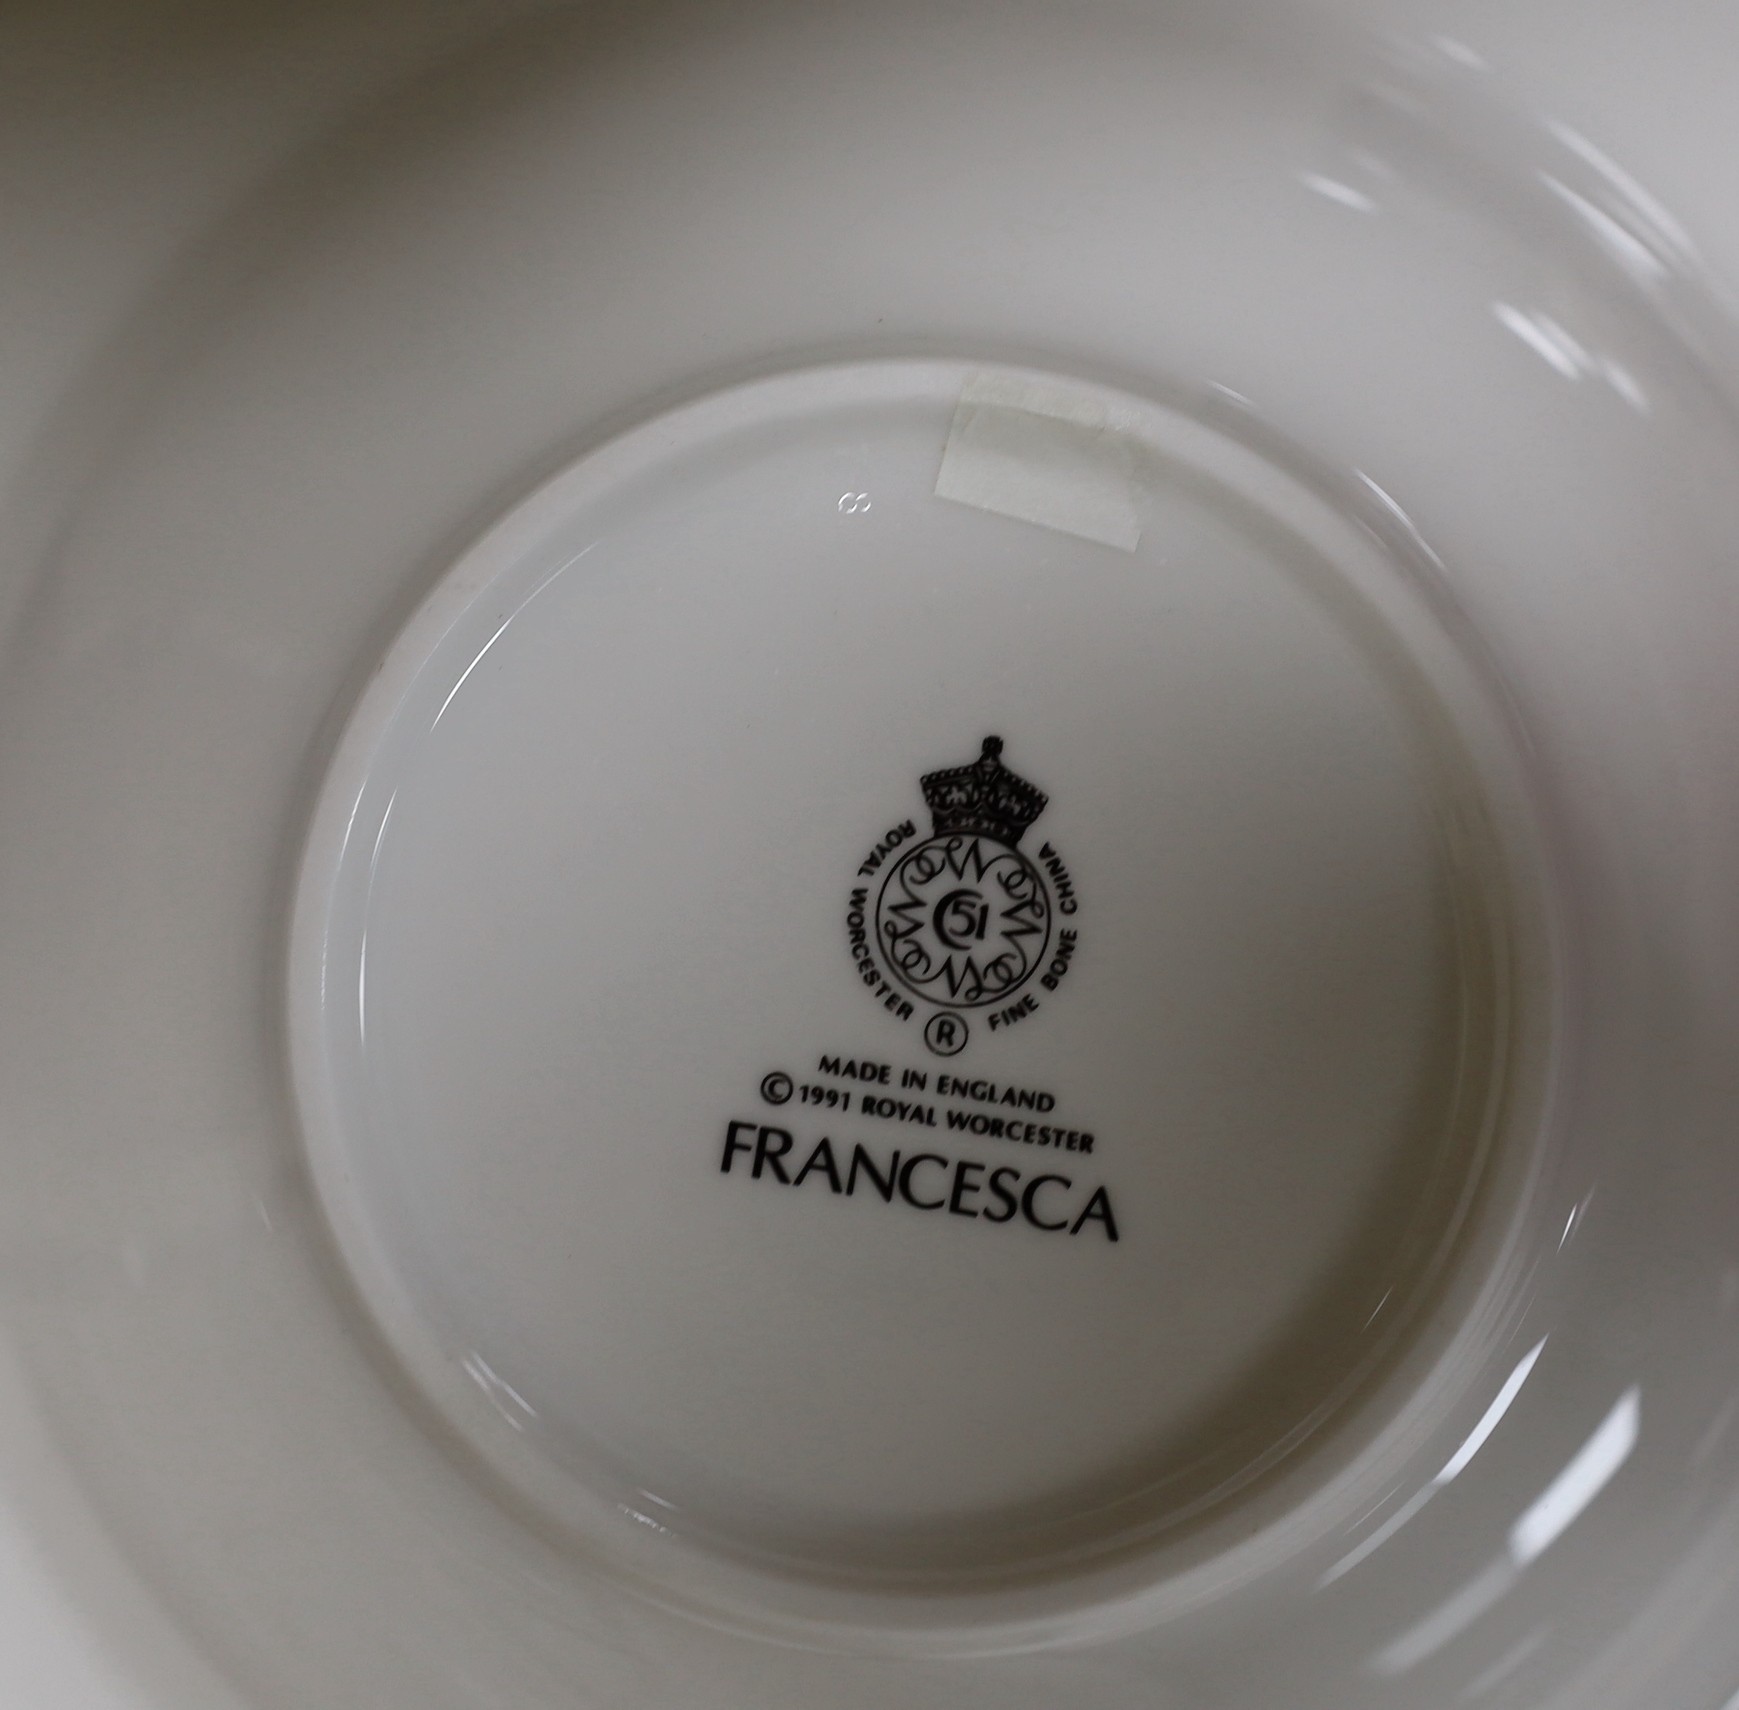 A Royal Worcester Francesca pattern dinner service, settings for 12 persons.